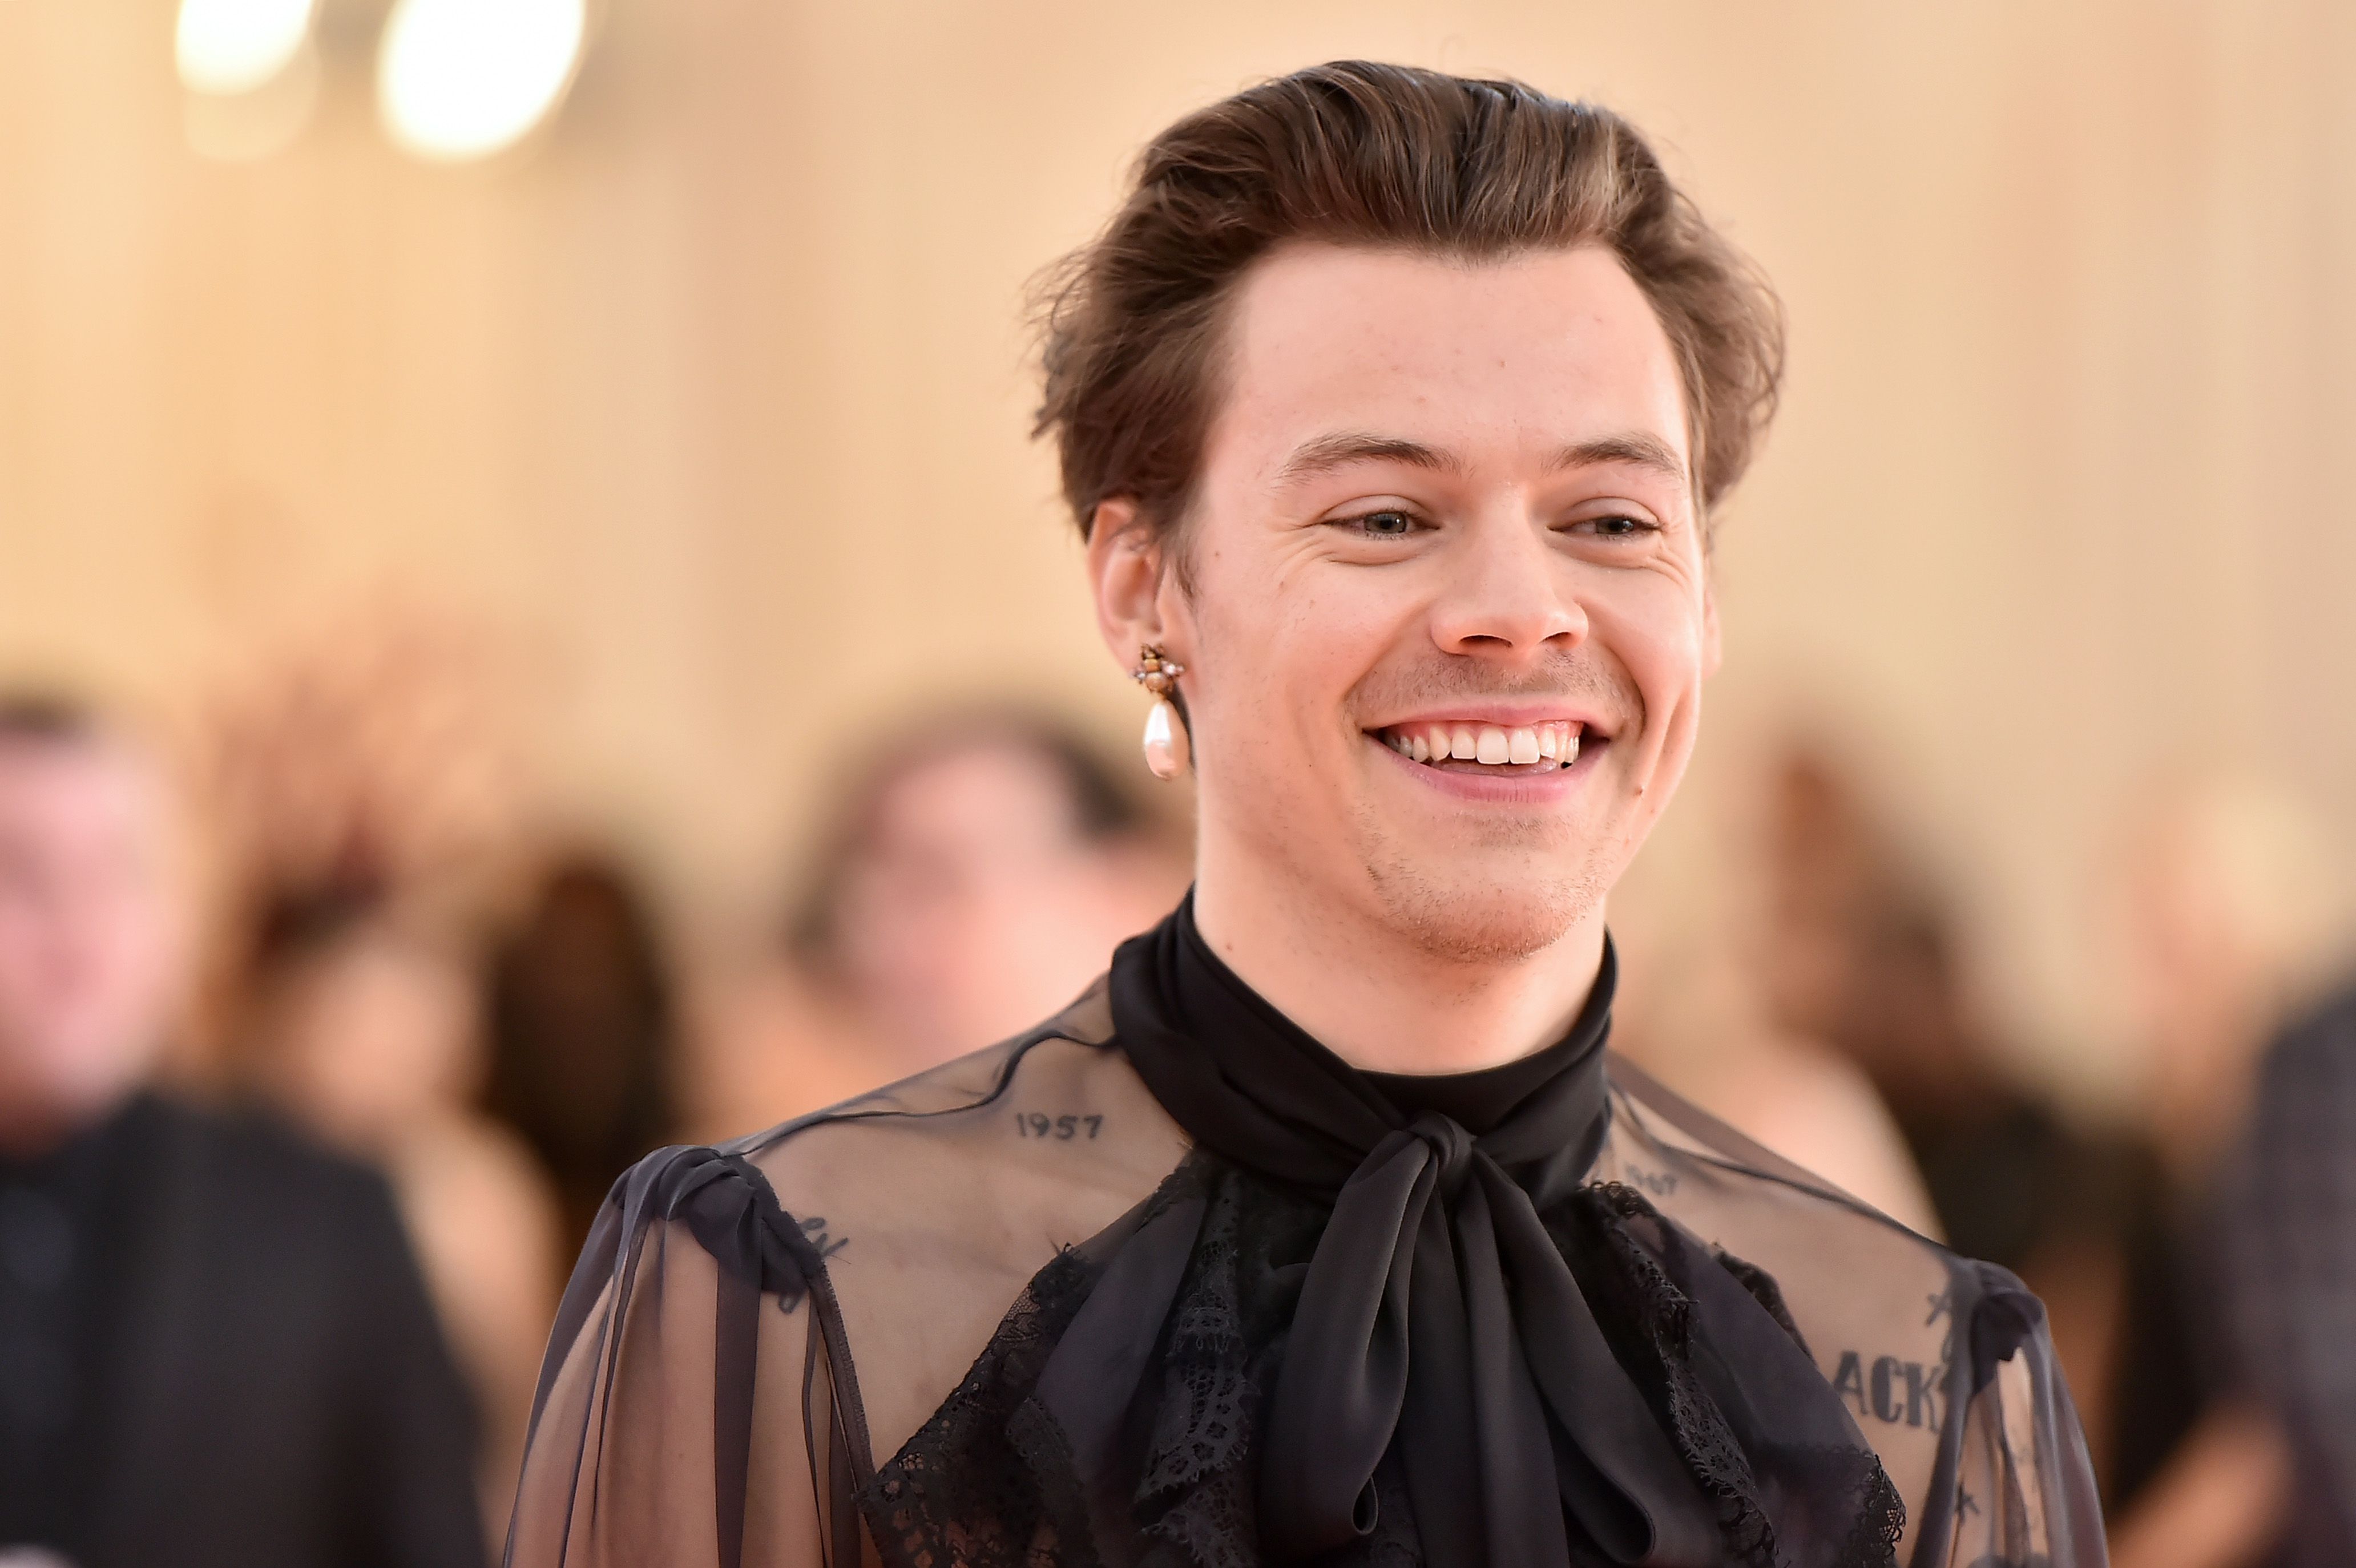 Cantor Harry Styles (Foto: Getty Images)